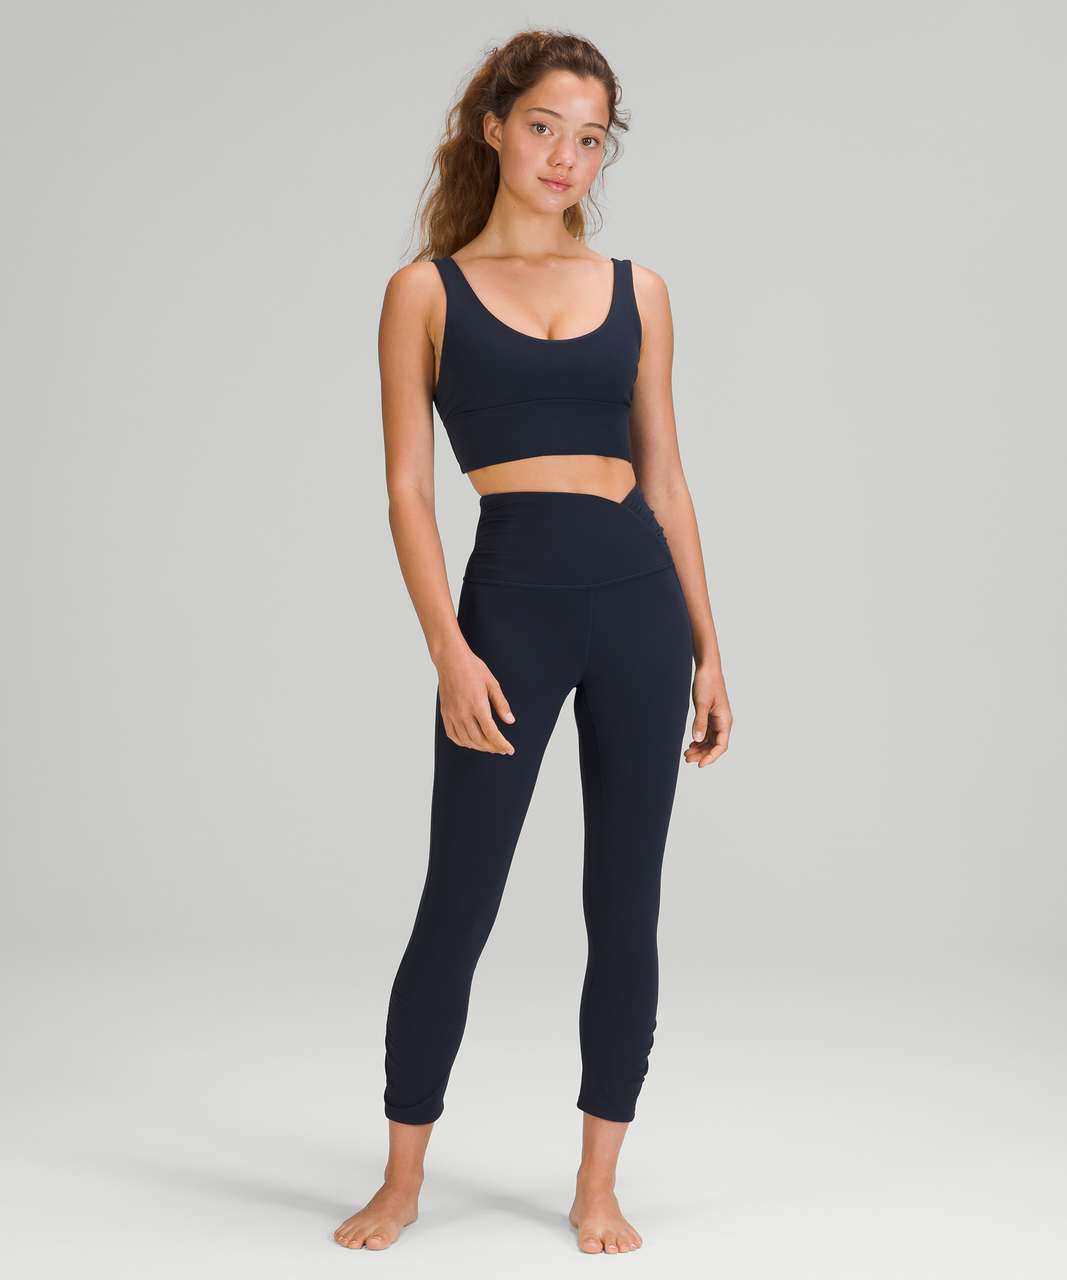 Flow y bra in pink bliss size 8 and align pant in true navy size 4 : r/ lululemon